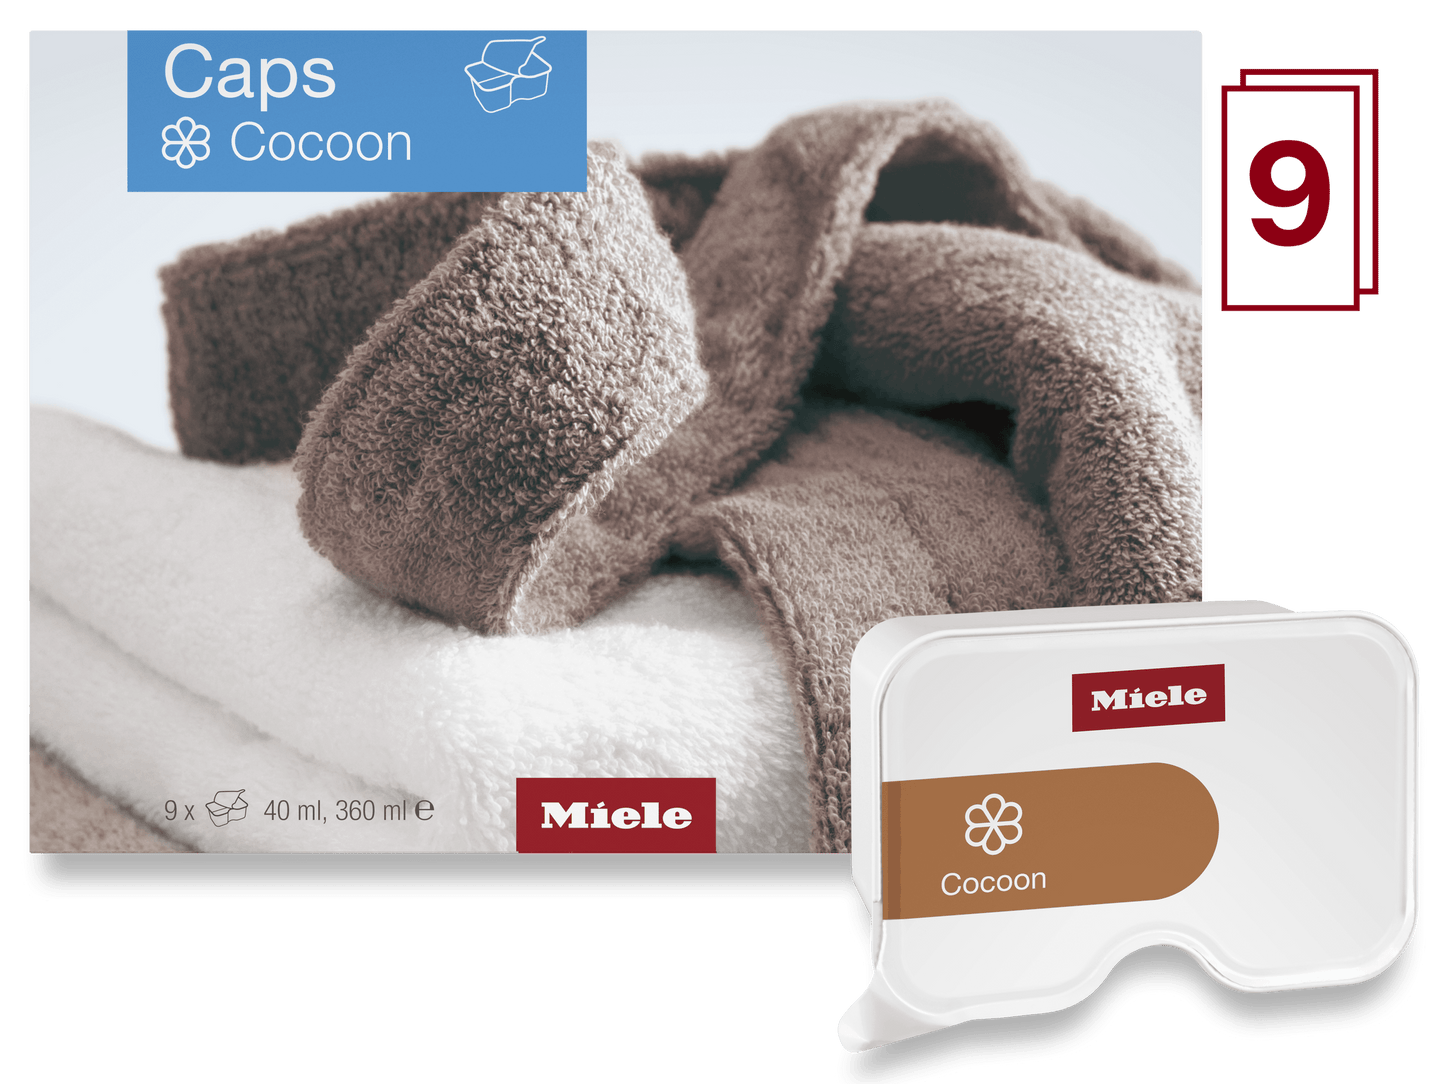 Miele WACSOC0902L Cocoon Capsules - 9-Pack Of Fabric Softener For Freshly Scented Laundry. Easyopen.